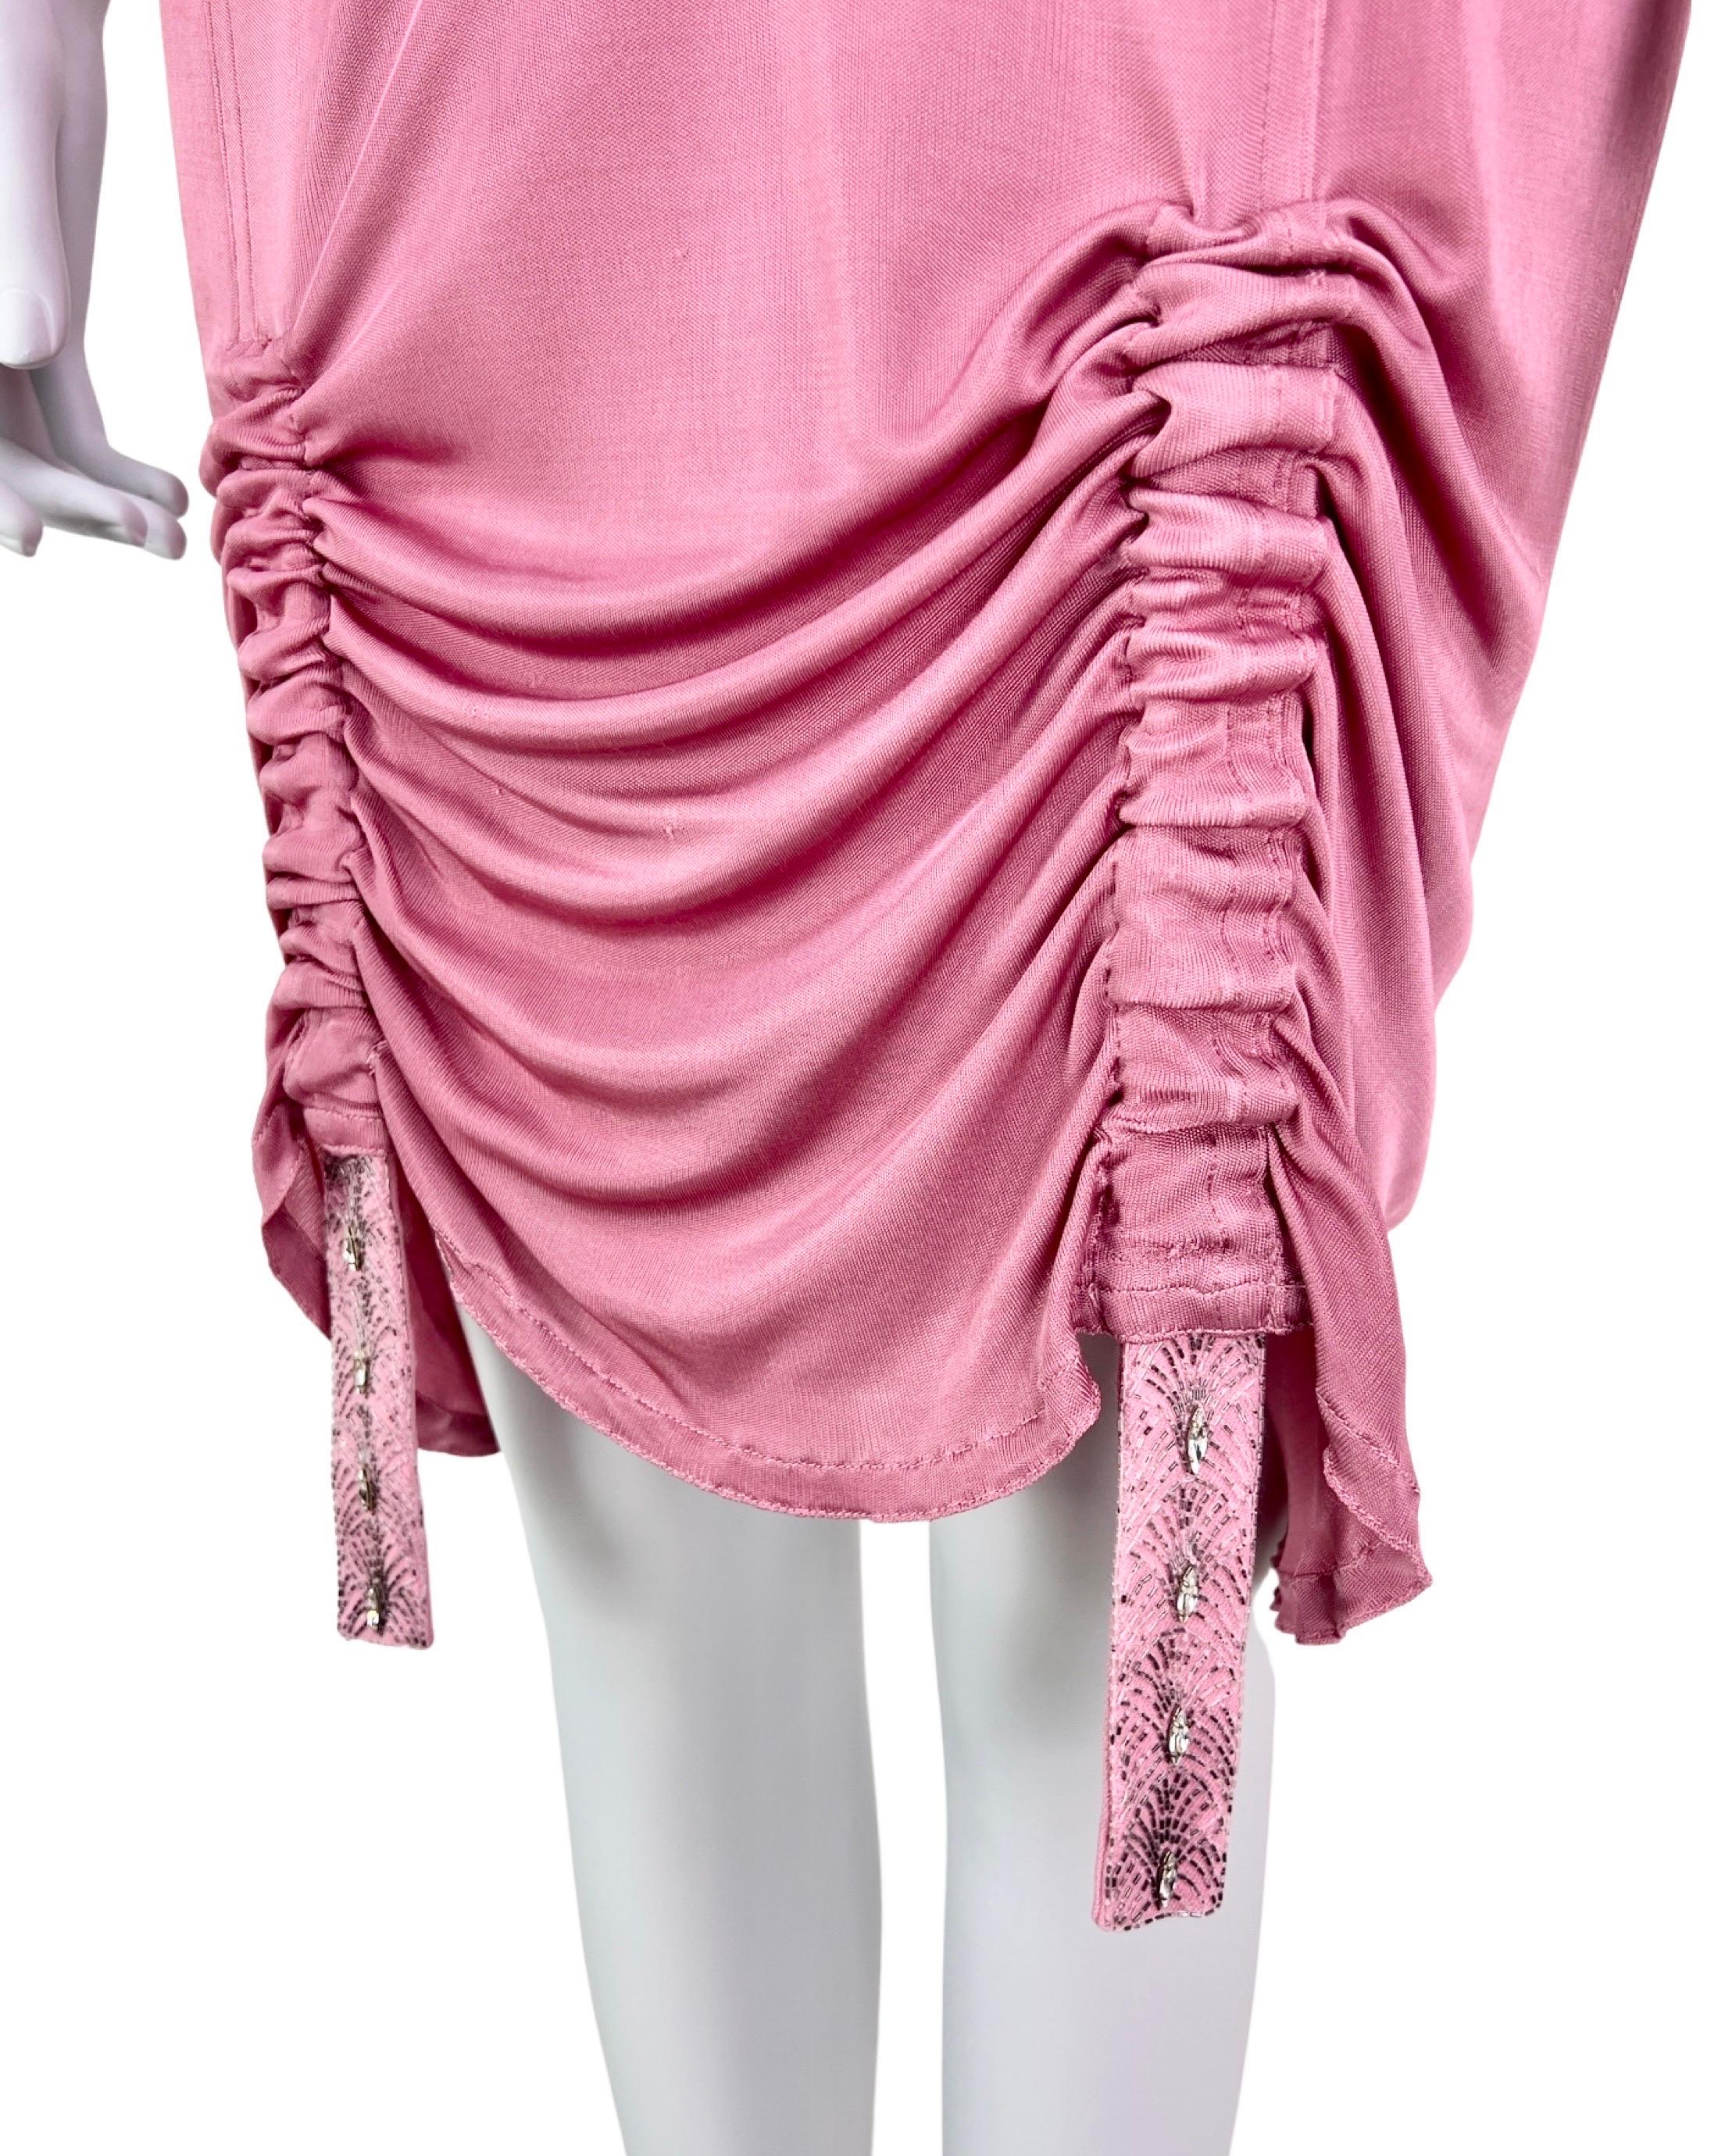 Dior by John Galliano Fall 2003 Embellished Silk Dress For Sale 7